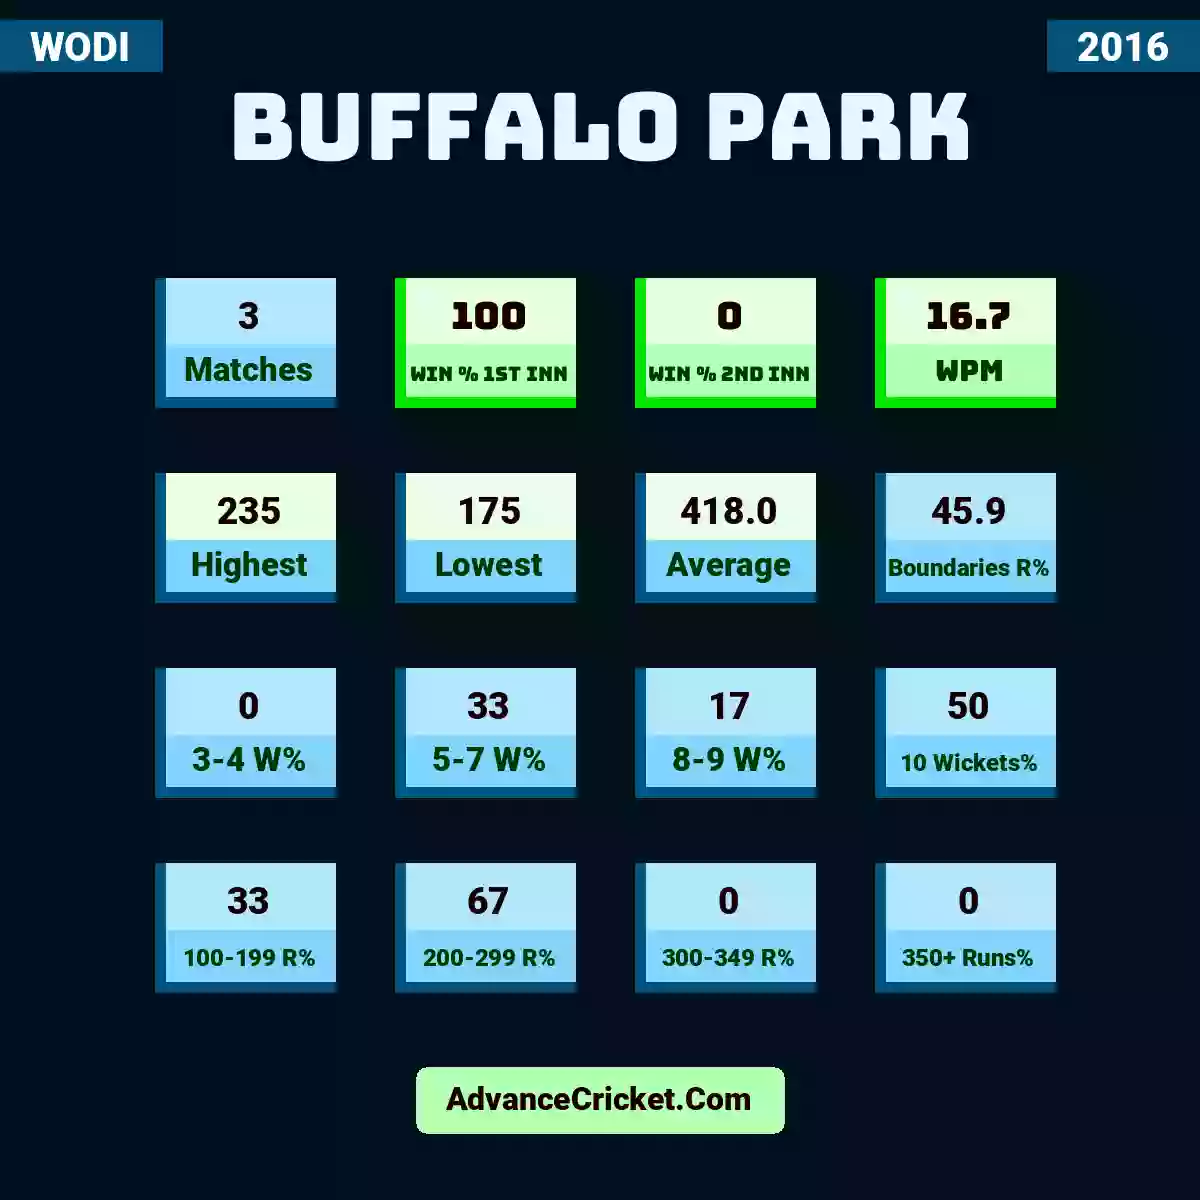 Image showing Buffalo Park with Matches: 3, Win % 1st Inn: 100, Win % 2nd Inn: 0, WPM: 16.7, Highest: 235, Lowest: 175, Average: 418.0, Boundaries R%: 45.9, 3-4 W%: 0, 5-7 W%: 33, 8-9 W%: 17, 10 Wickets%: 50, 100-199 R%: 33, 200-299 R%: 67, 300-349 R%: 0, 350+ Runs%: 0.